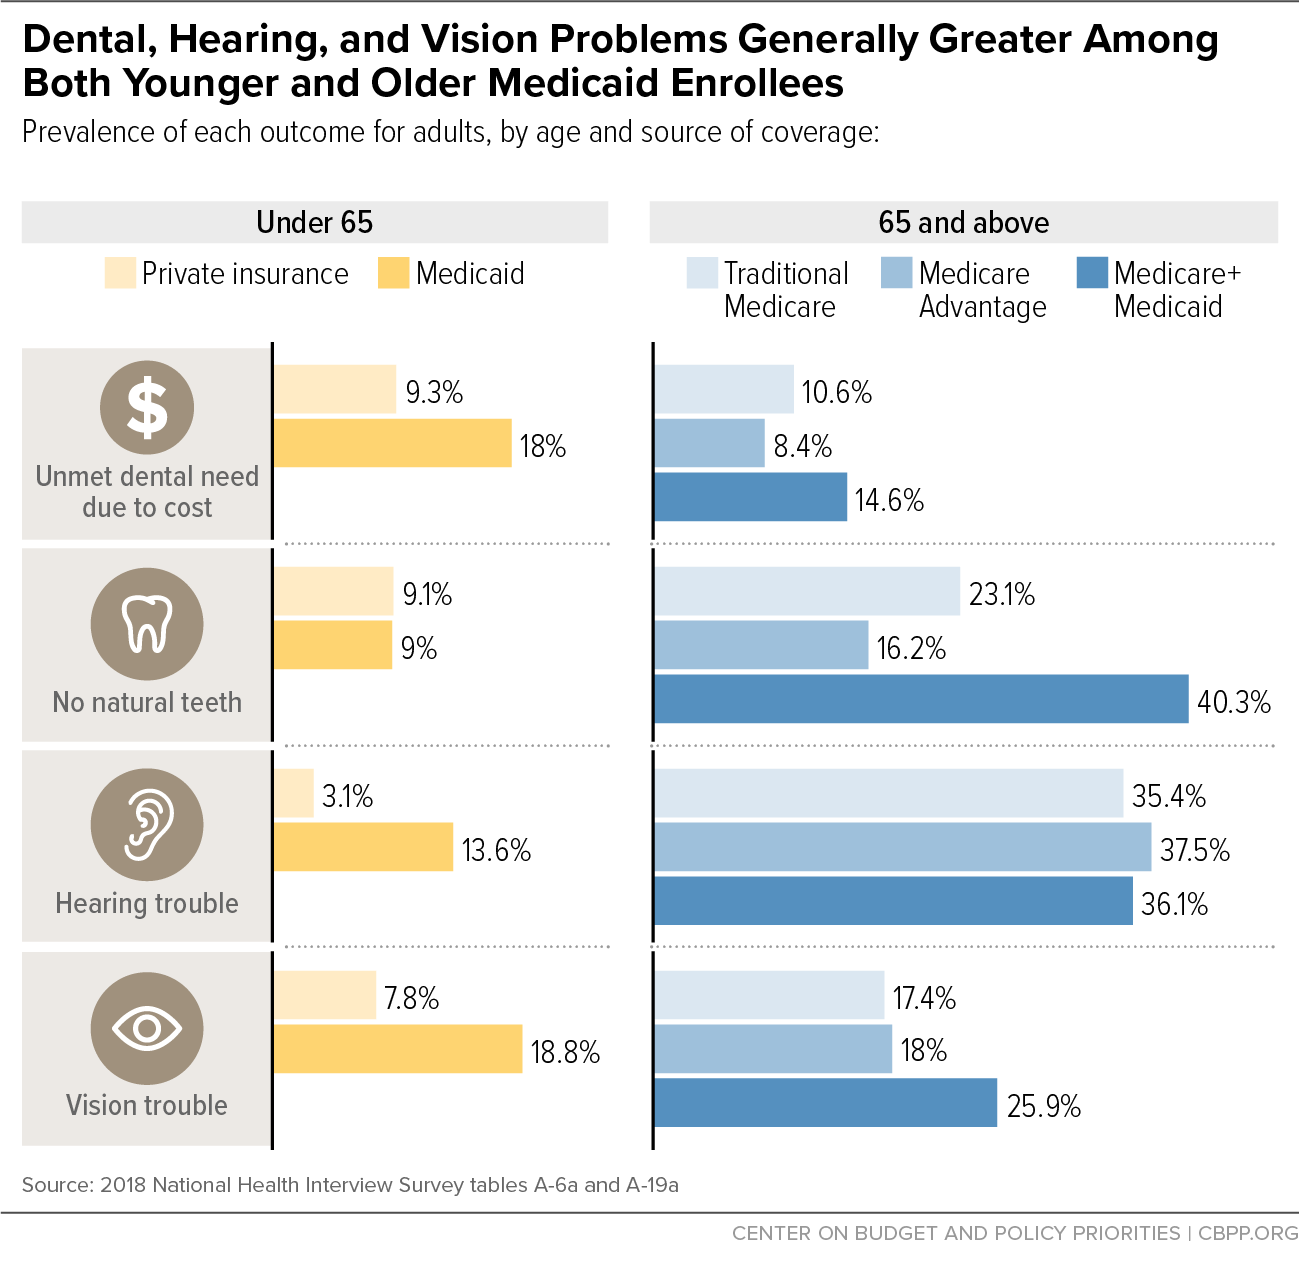 Dental, Hearing, and Vision Problems Generally Greater Among Both Younger and Older Medicaid Enrollees